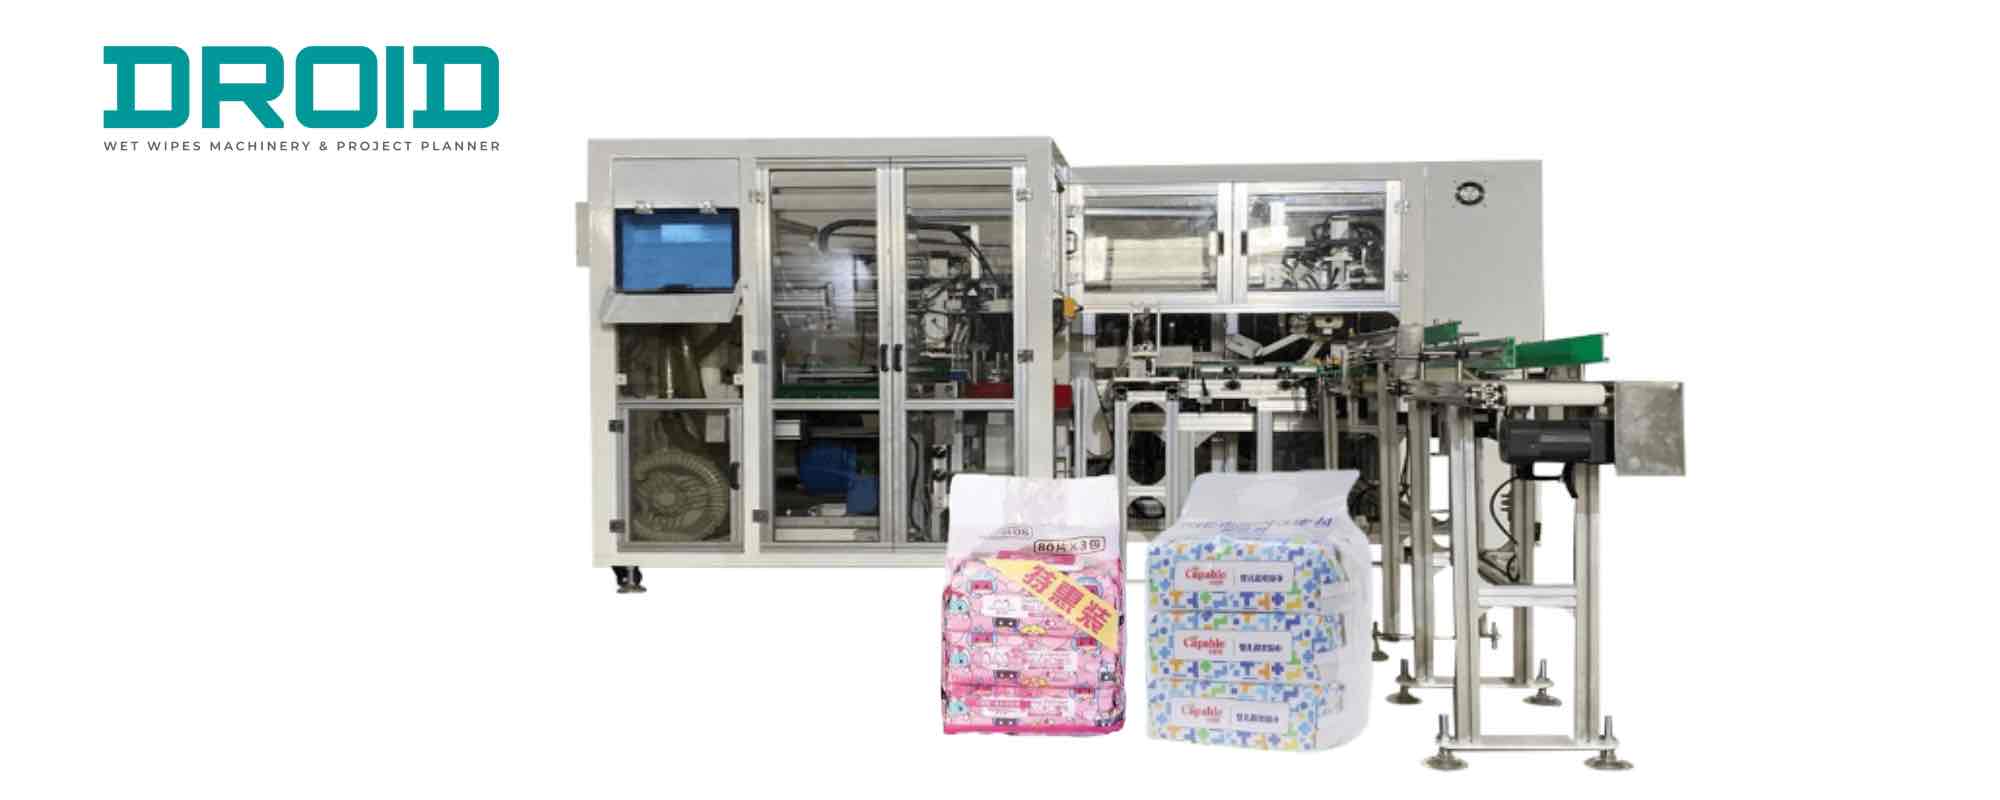 DH MP80 Automated Multipack Wet Wipes Bagging Machine - Wet Wipes Machine Products